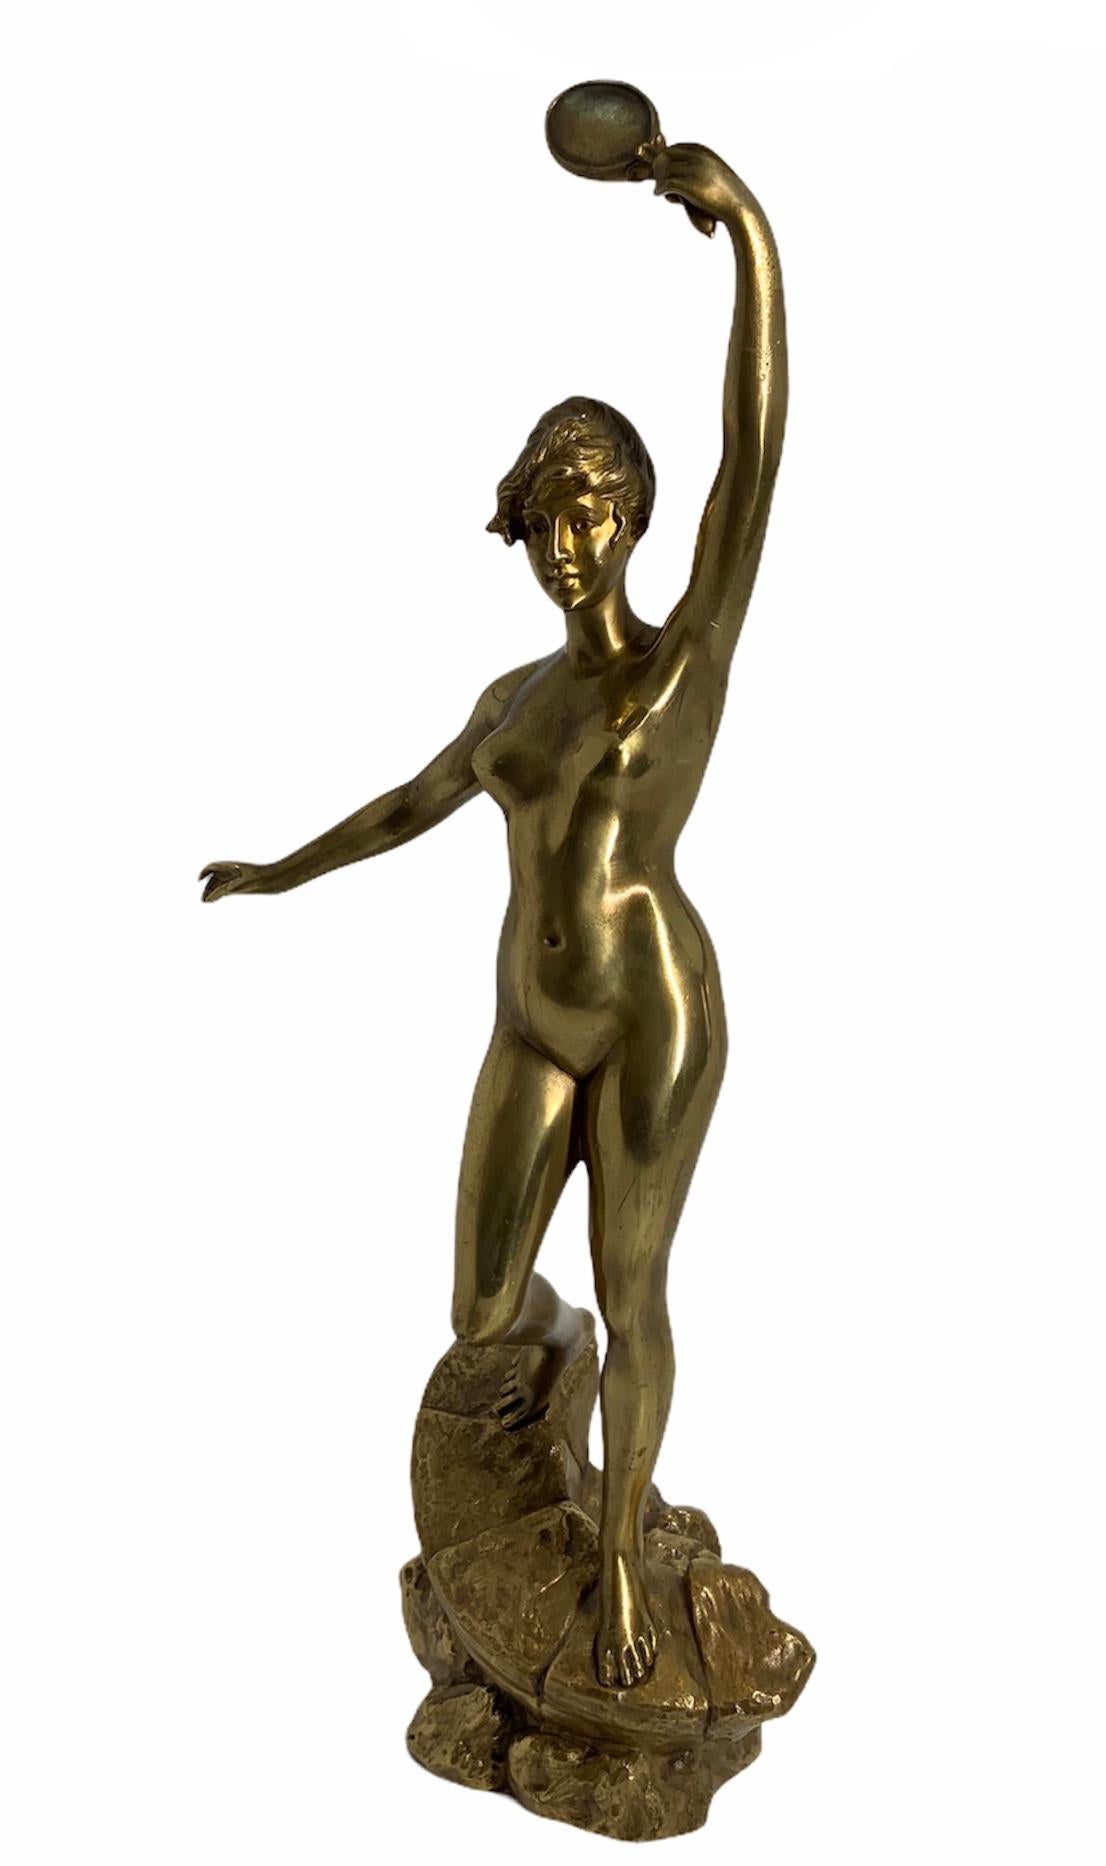 This is a gilt bronze sculpture of a happy nude lady. She is lifting her left arm/hand and holding a mirror while looking at herself in it. She is standing over a sloped shaped rock over another rock. The sculpture is signed by D.Grisard.